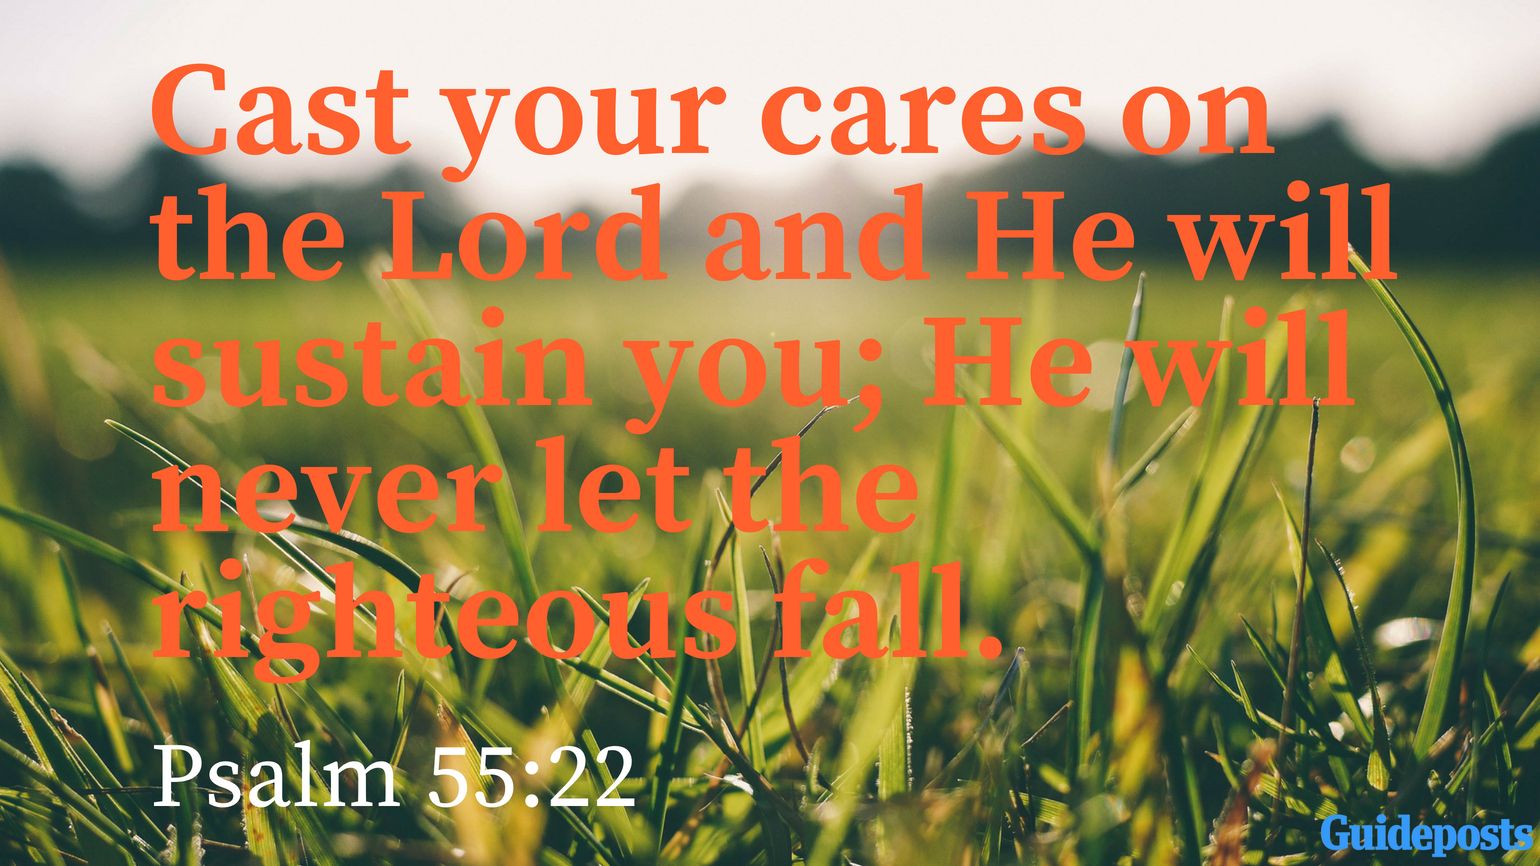 Bible Verse for Coping With Grief: Cast your cares on the Lord and He will sustain you; He will never let the righteous fall. Psalm 55:22 Better Living Life Advice